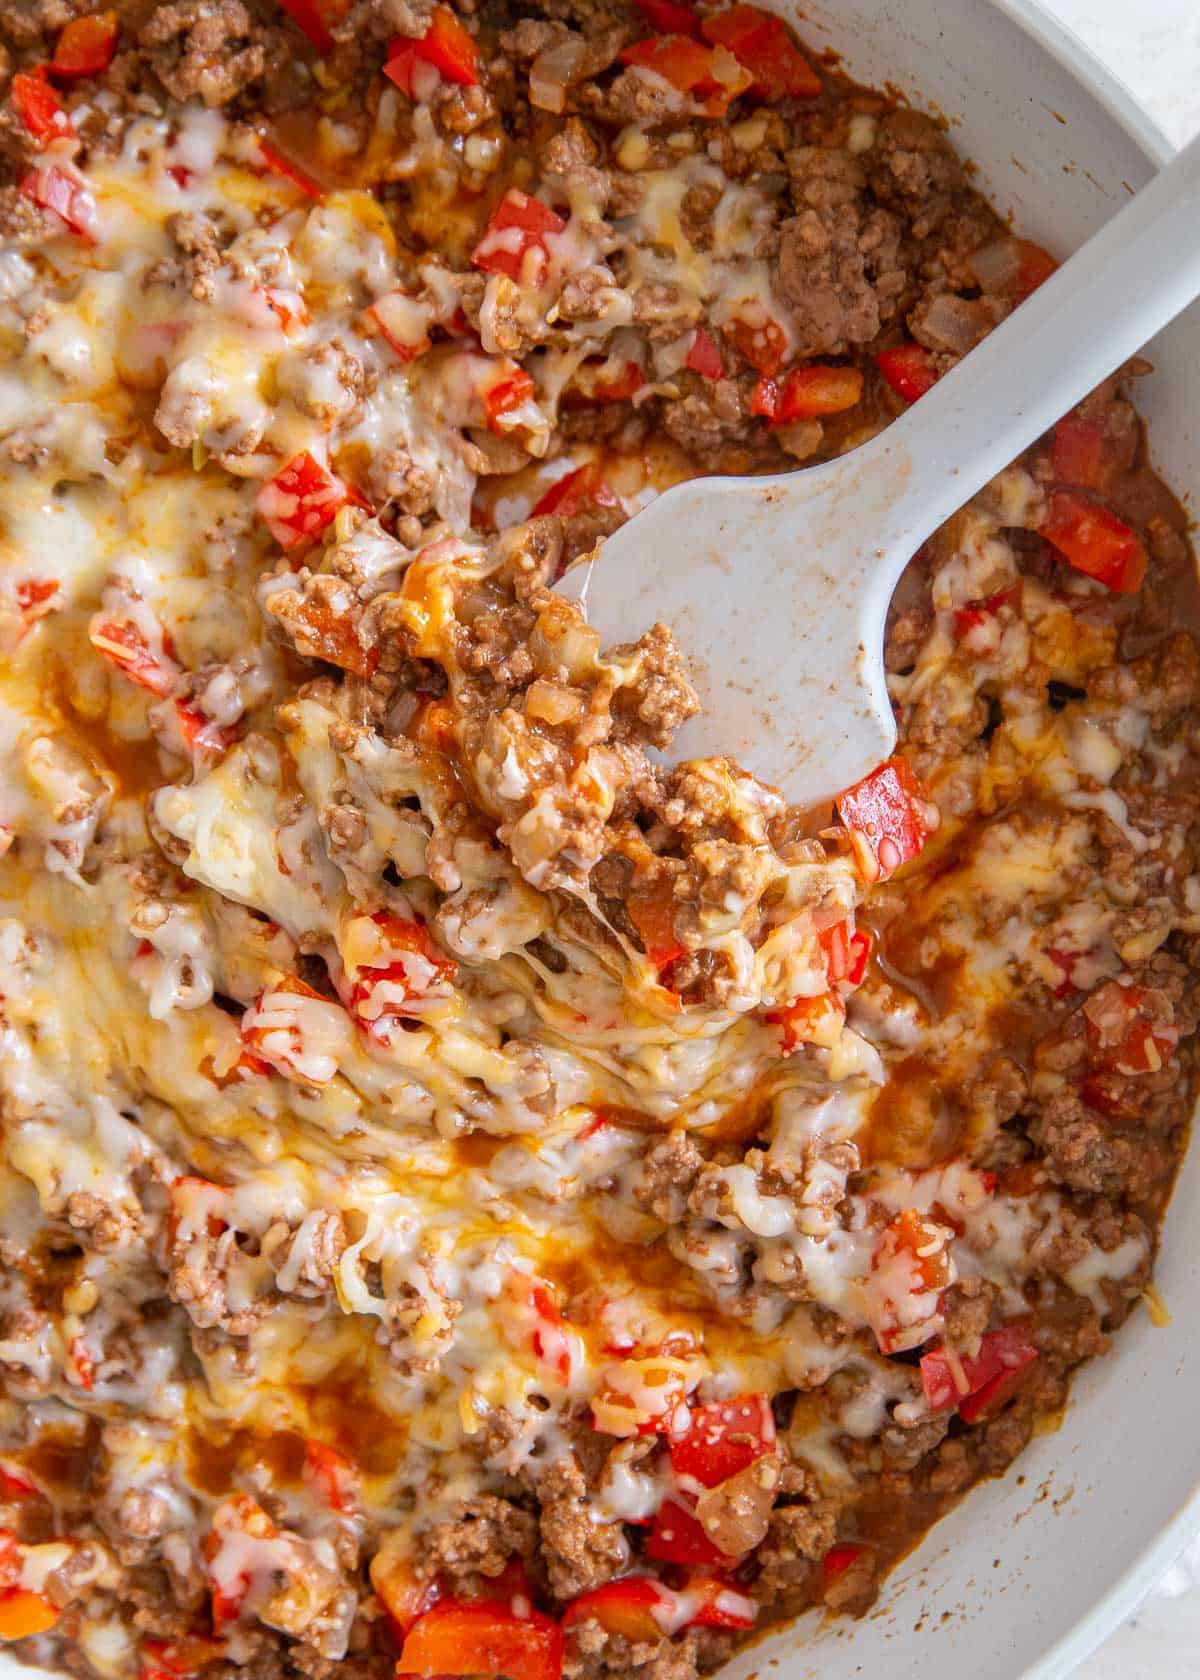 An indulgent recipe for healthier sloppy joes that doesn't skimp on flavor.